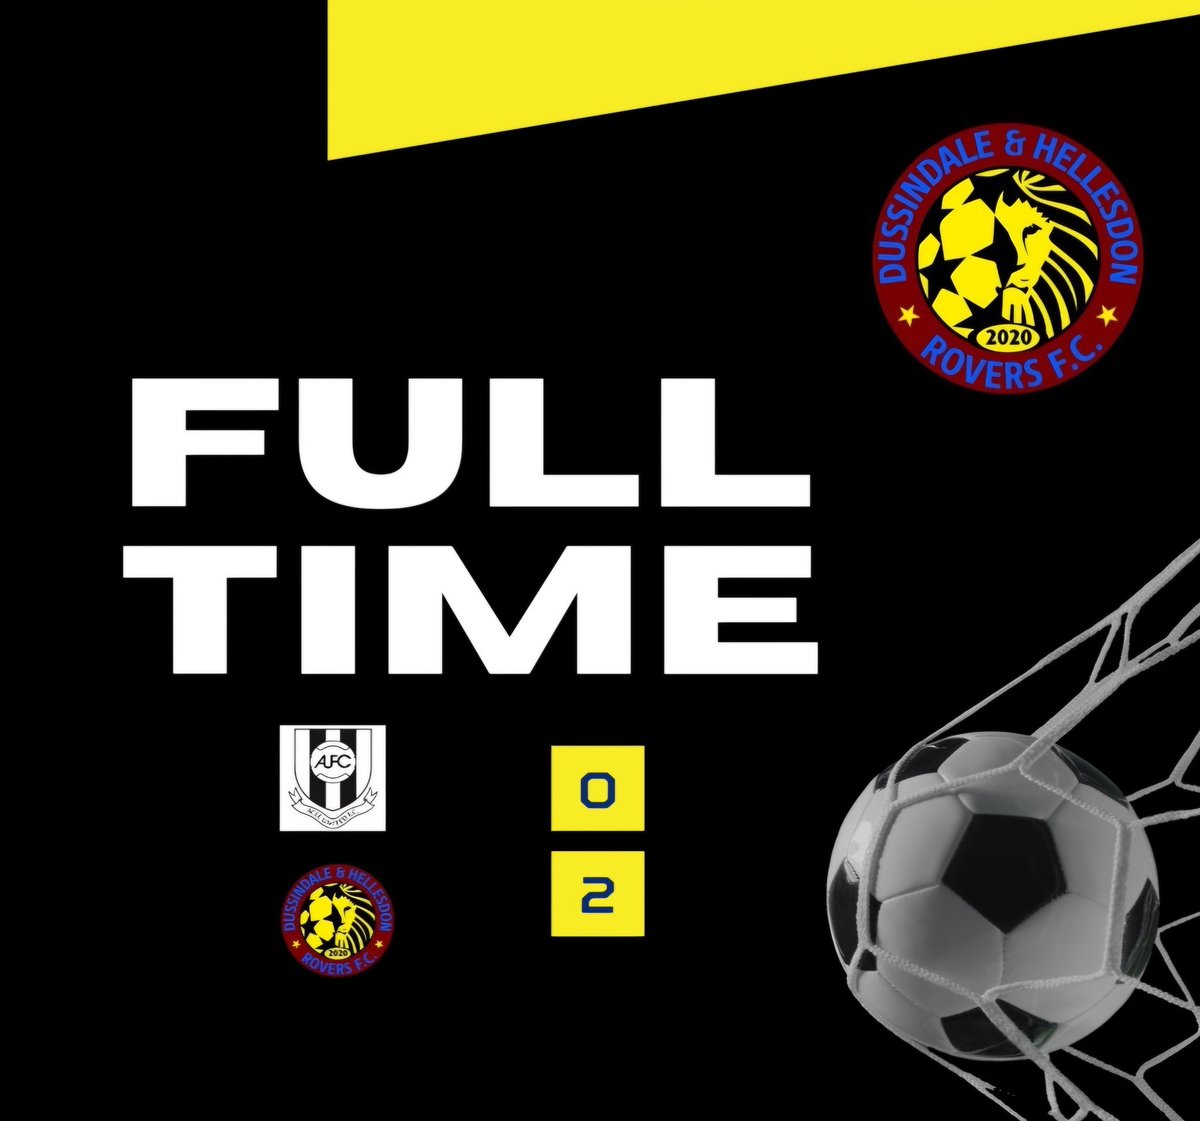 Full-time: Probably our best performance of the season , outstanding all over the pitch & with another depleted squad !! #upthedons 💛⚽️⚽️💛